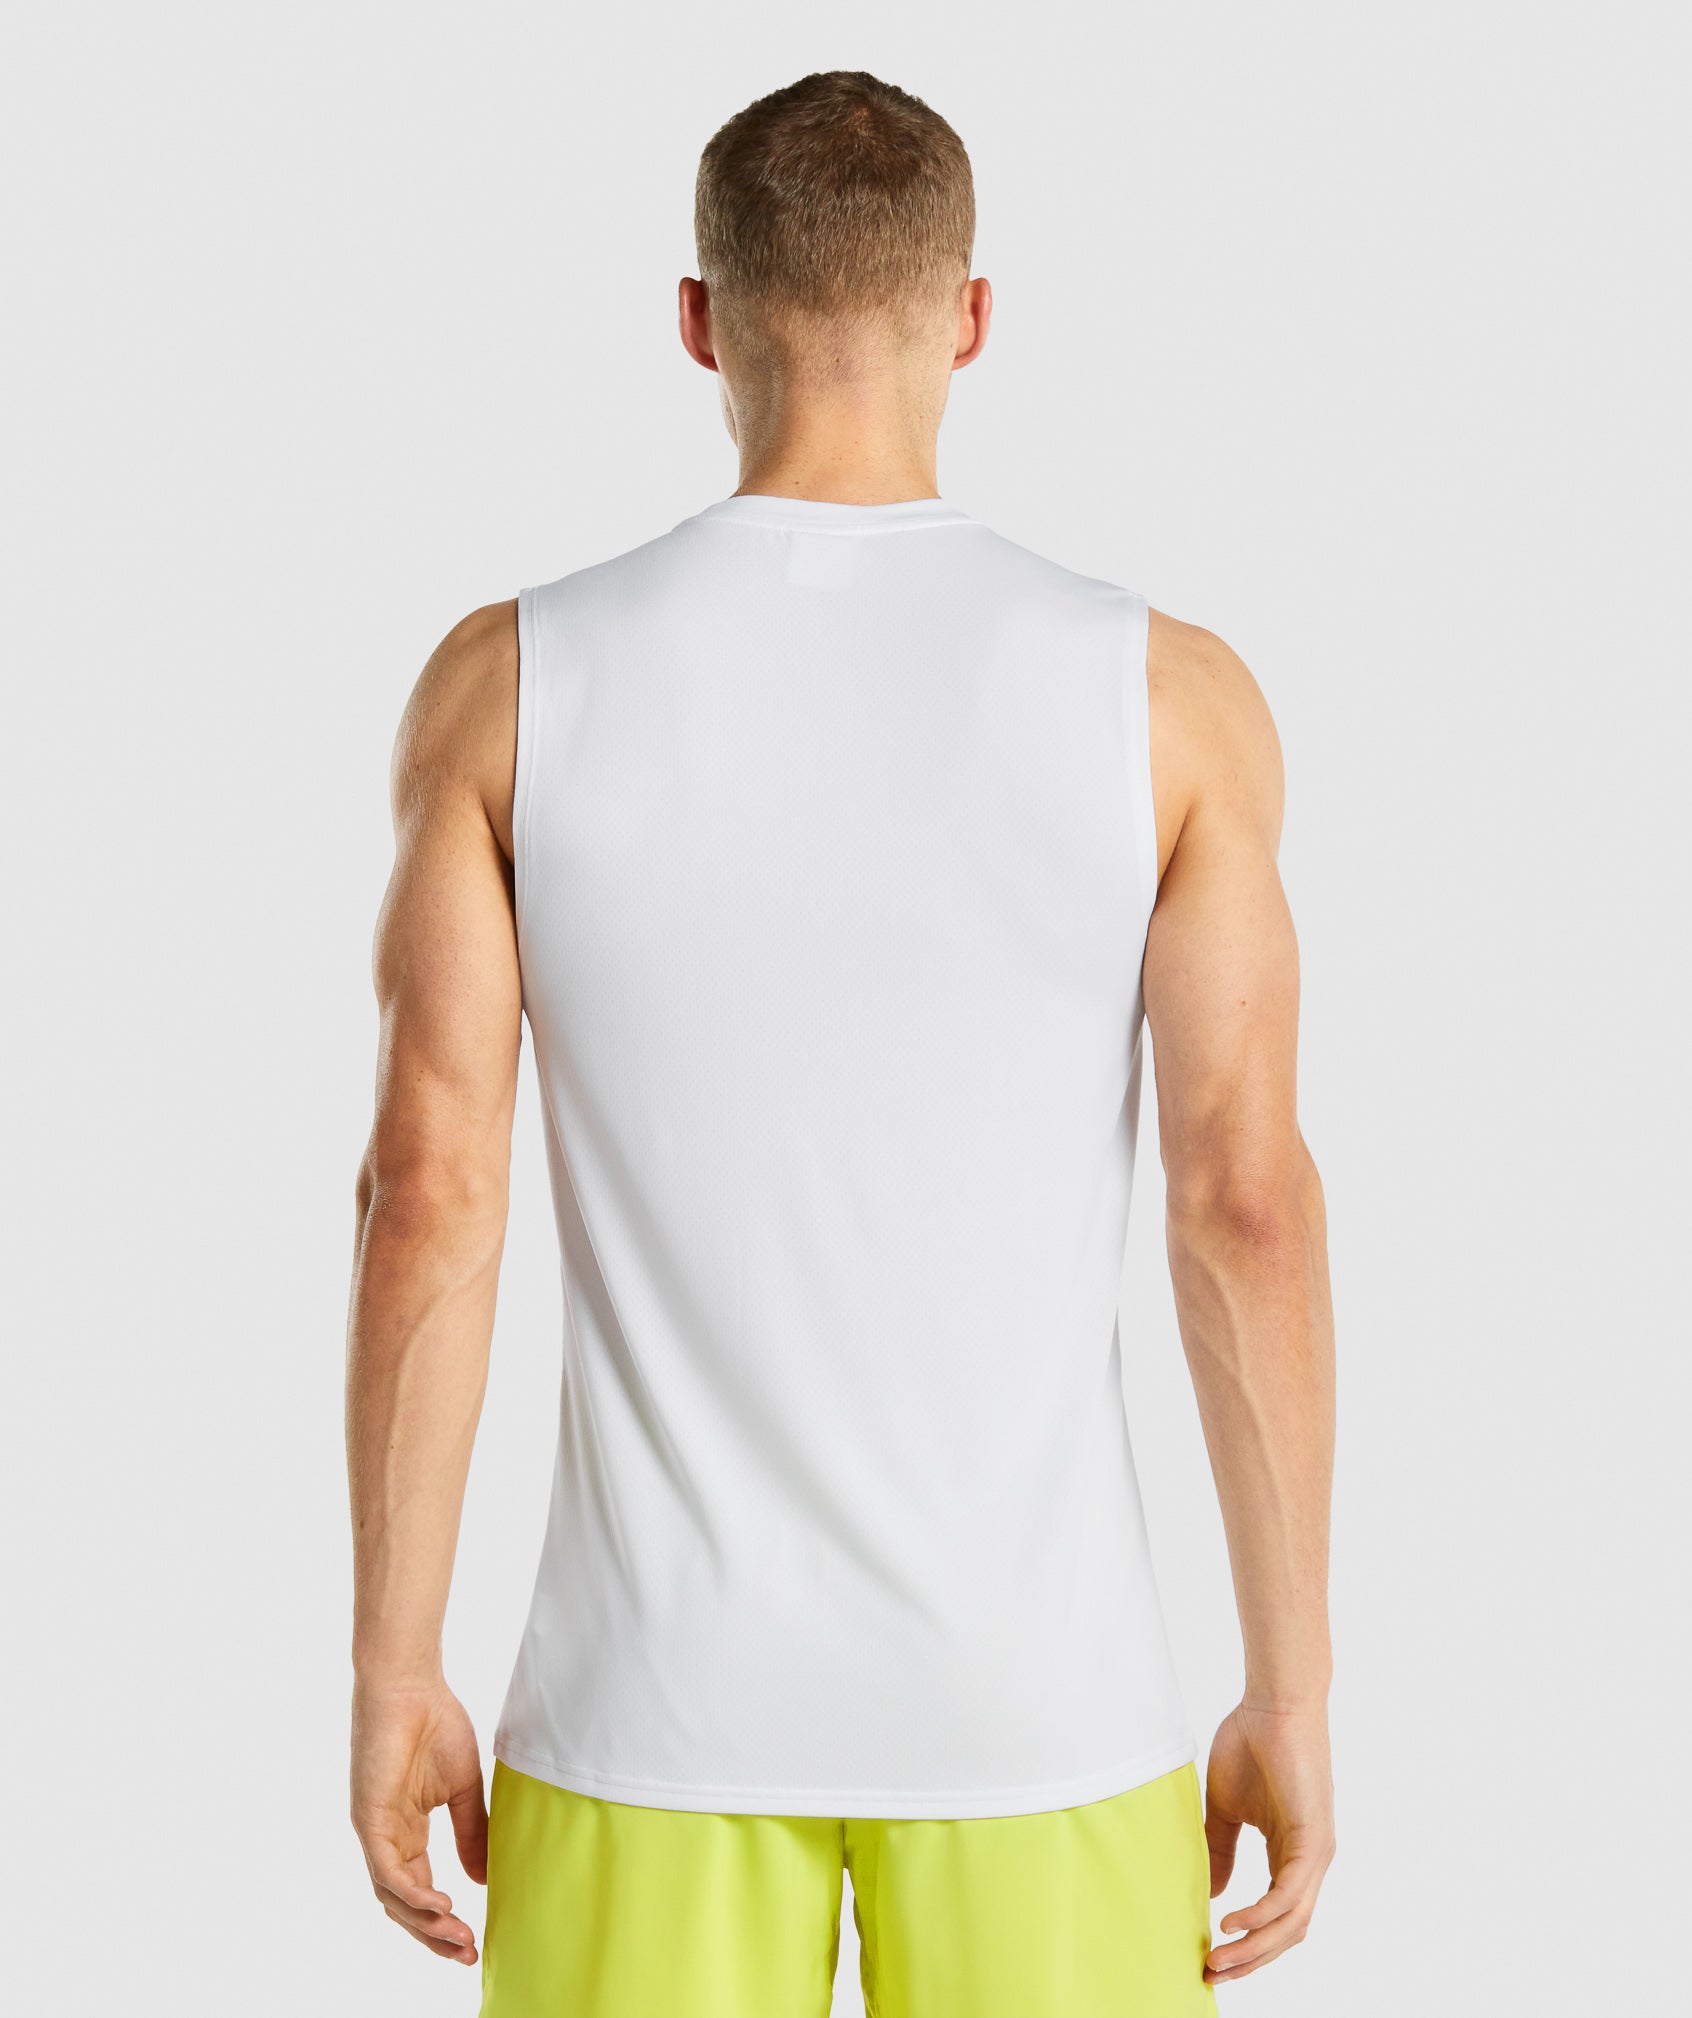 Arrival Sleeveless T-Shirt in White - view 2